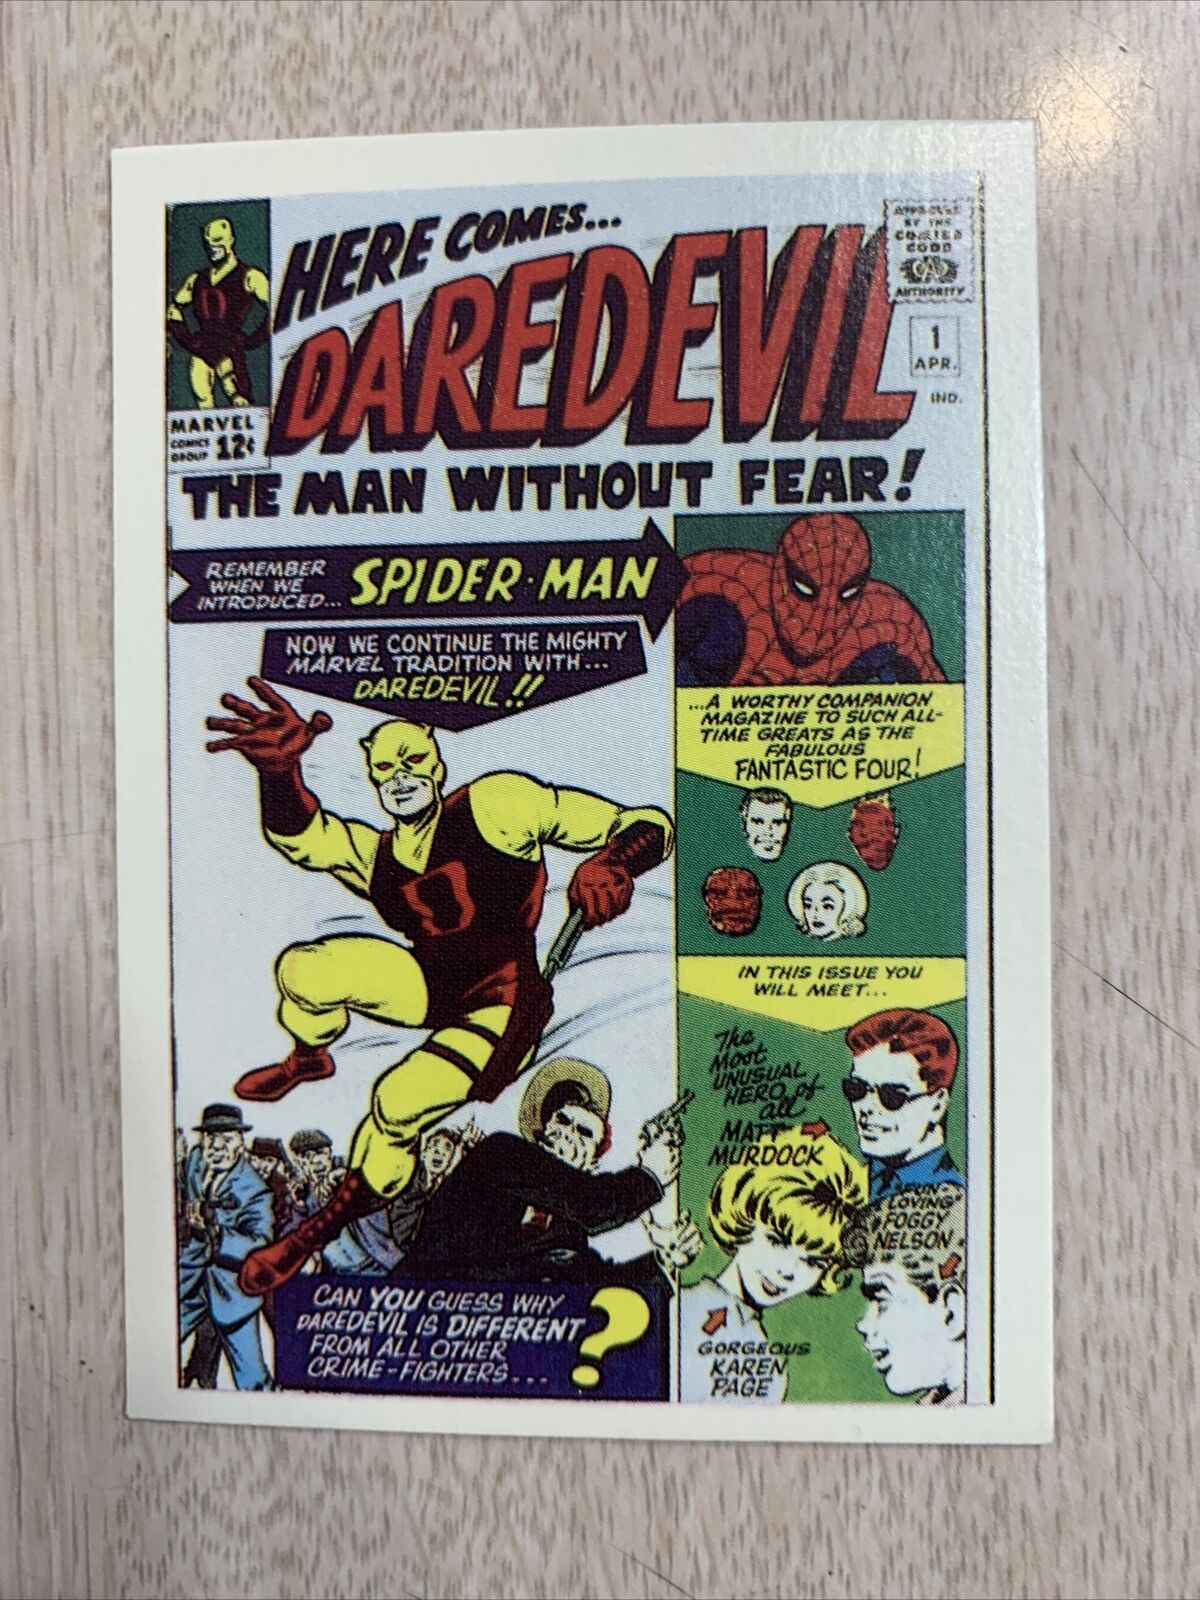 DAREDEVIL #1  MARVEL SUPERHEROES FIRST ISSUE COVERS NM 1984 BEAUTIFUL KIRBY